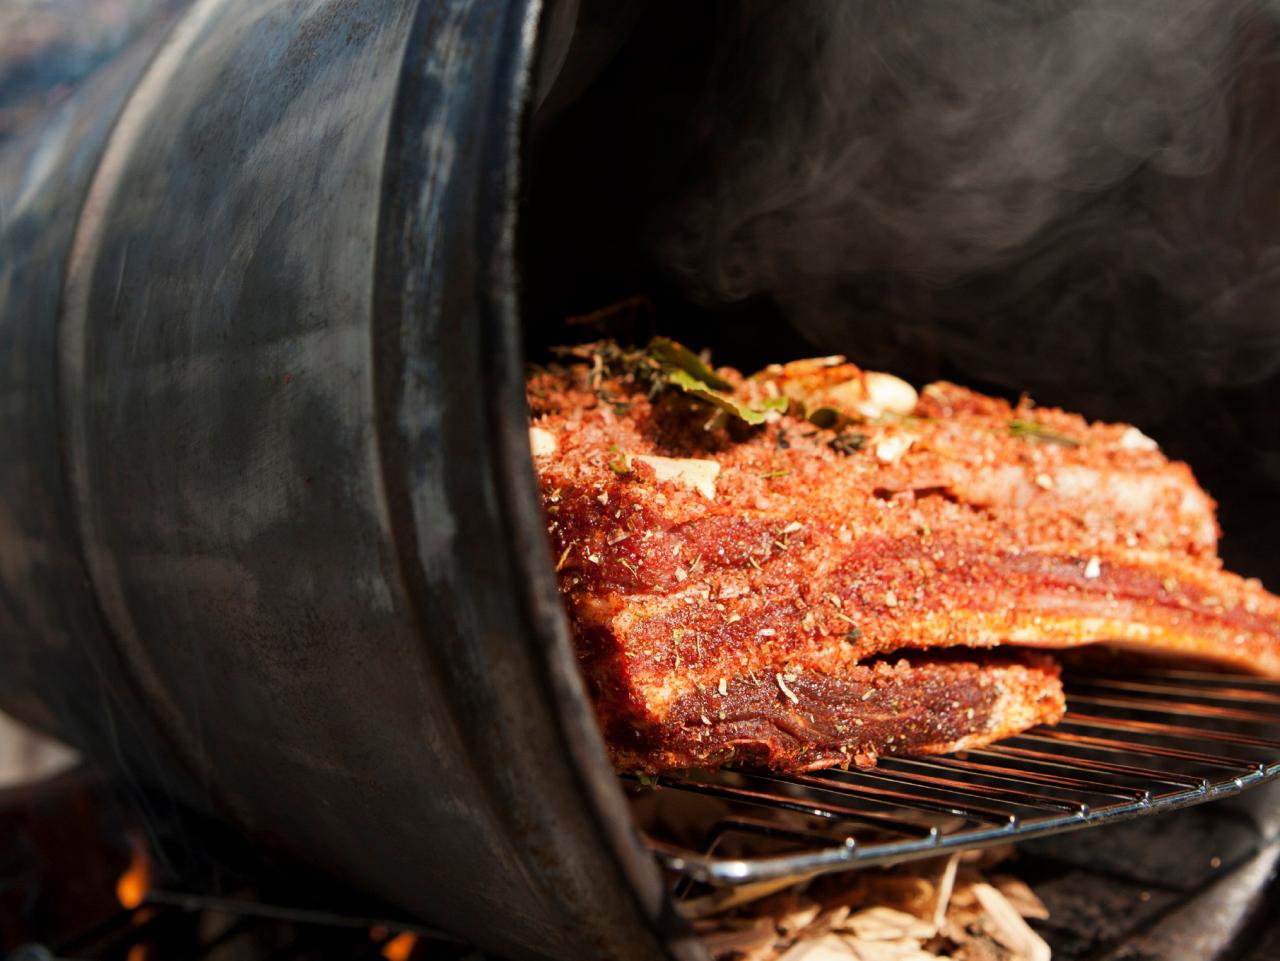 How to match wood to meat for best smoky flavors